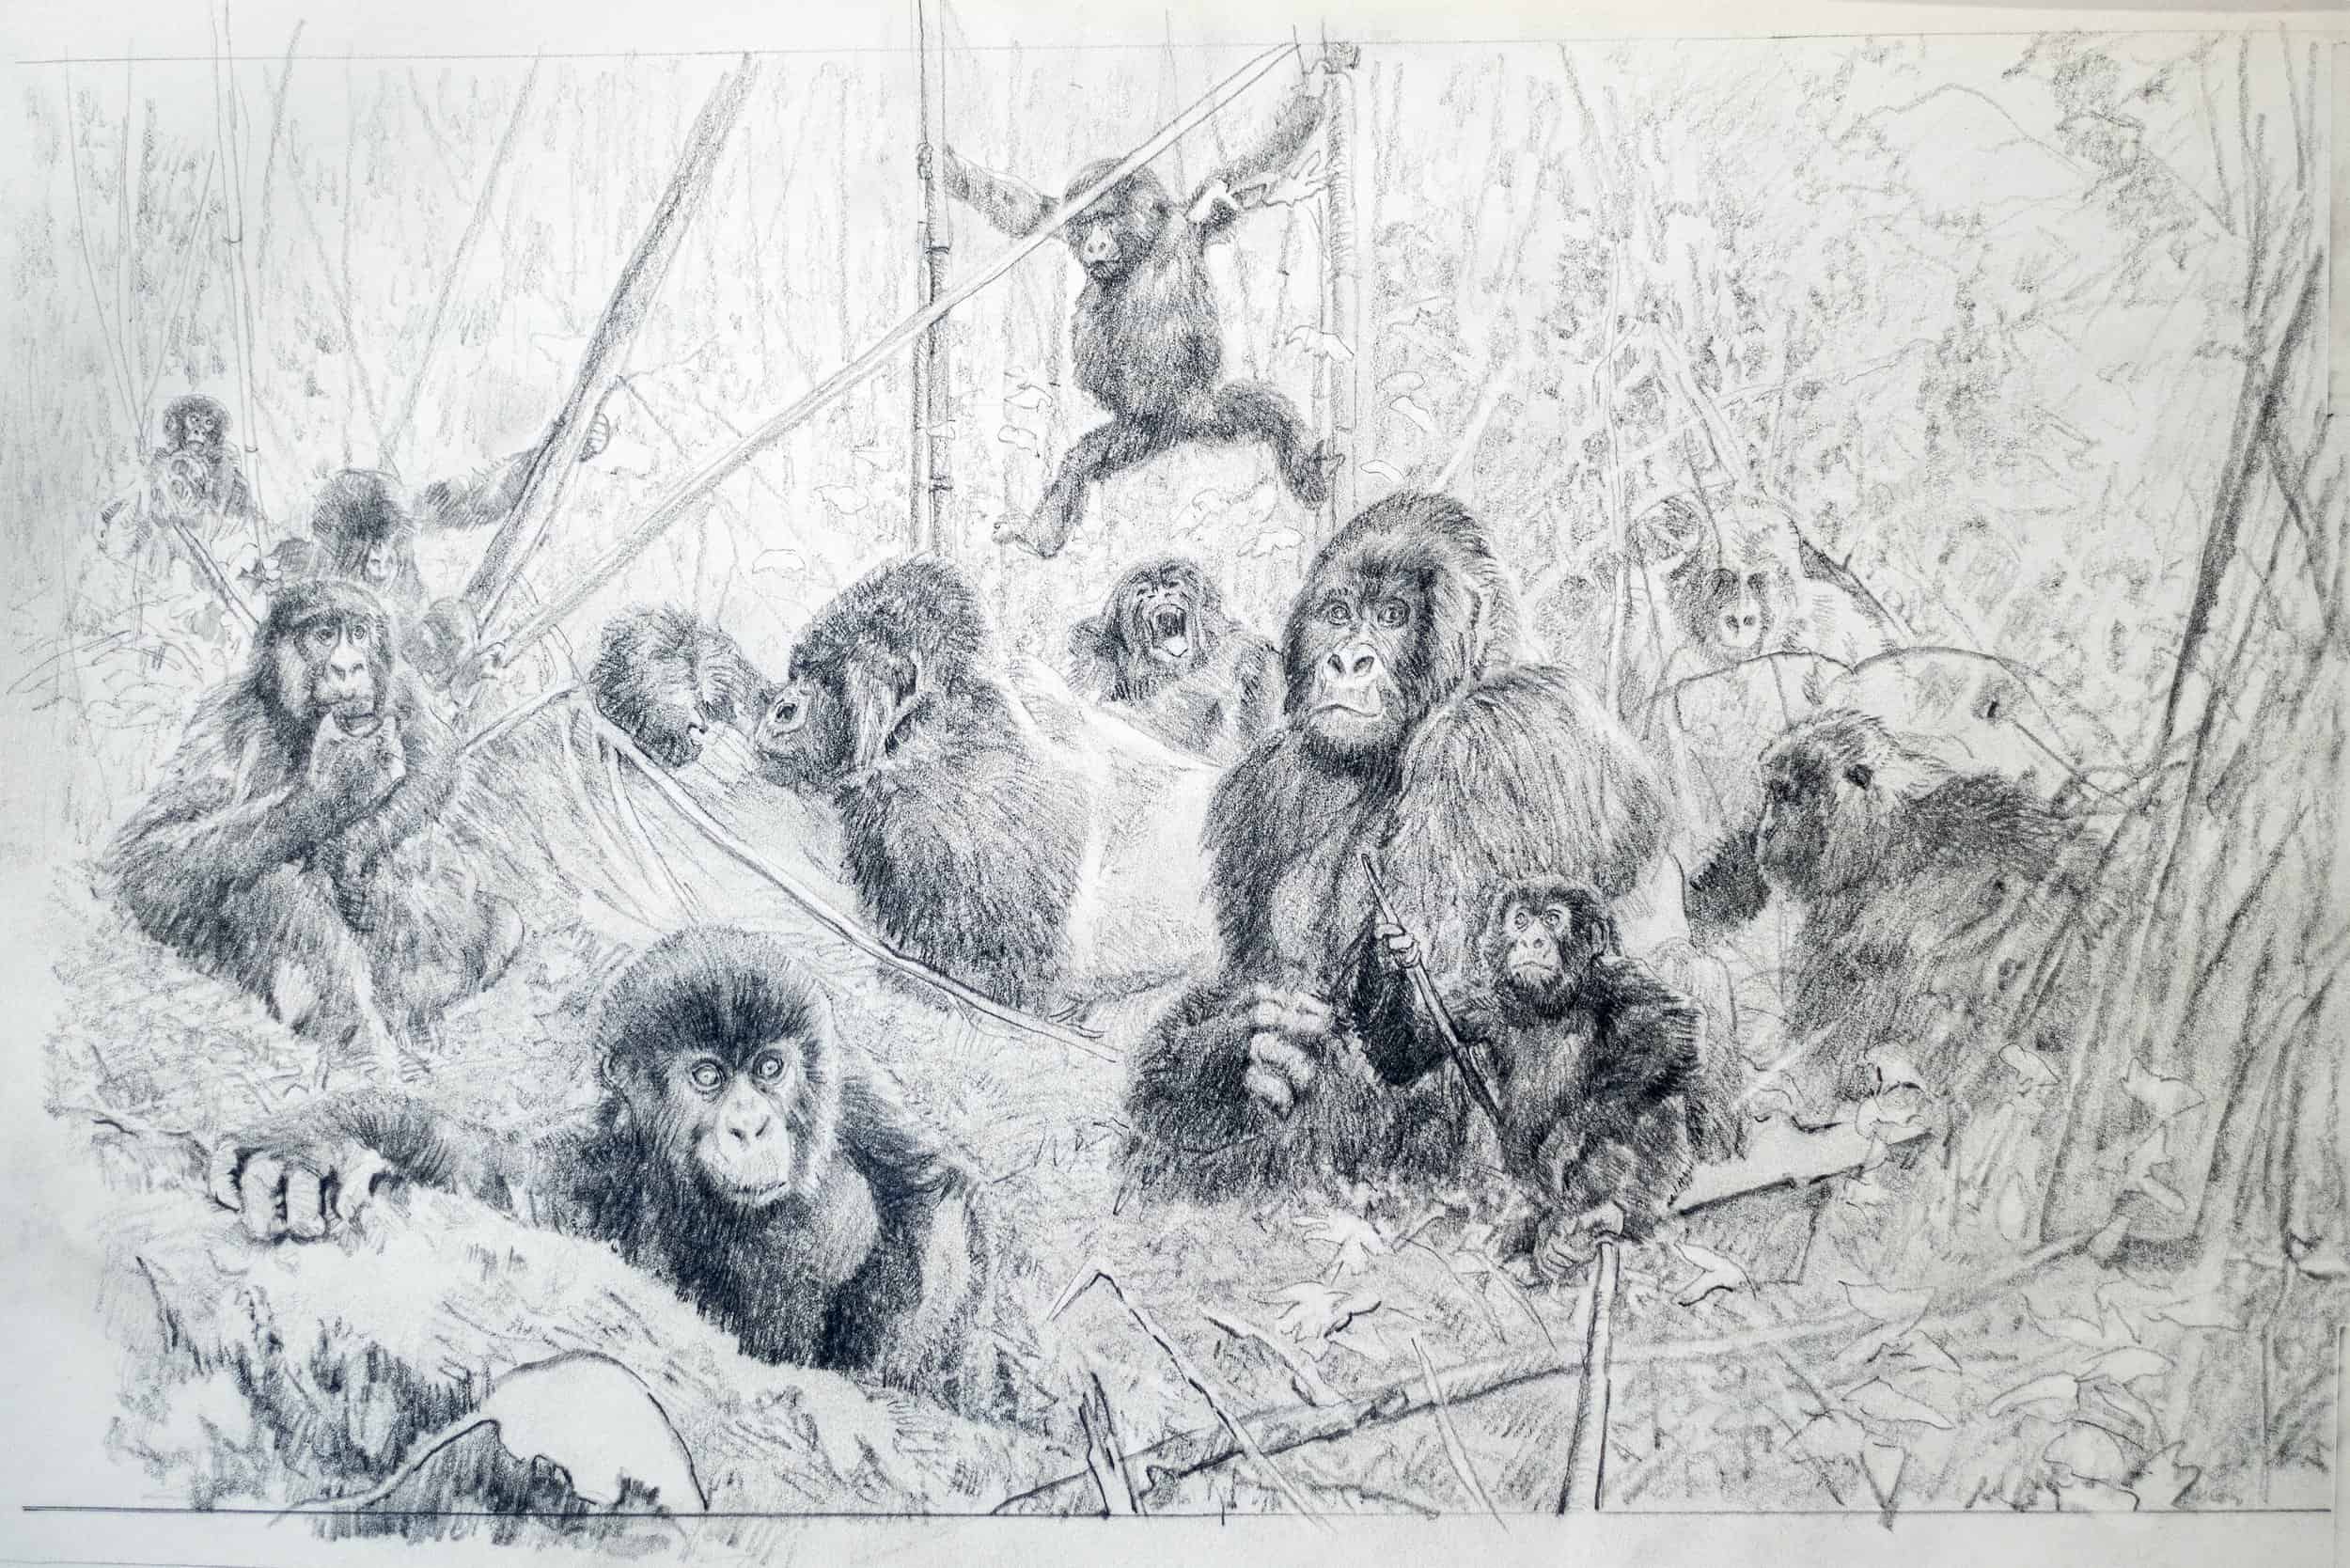 Black and white rough draft of John Banovich's painting of gorillas in jungle